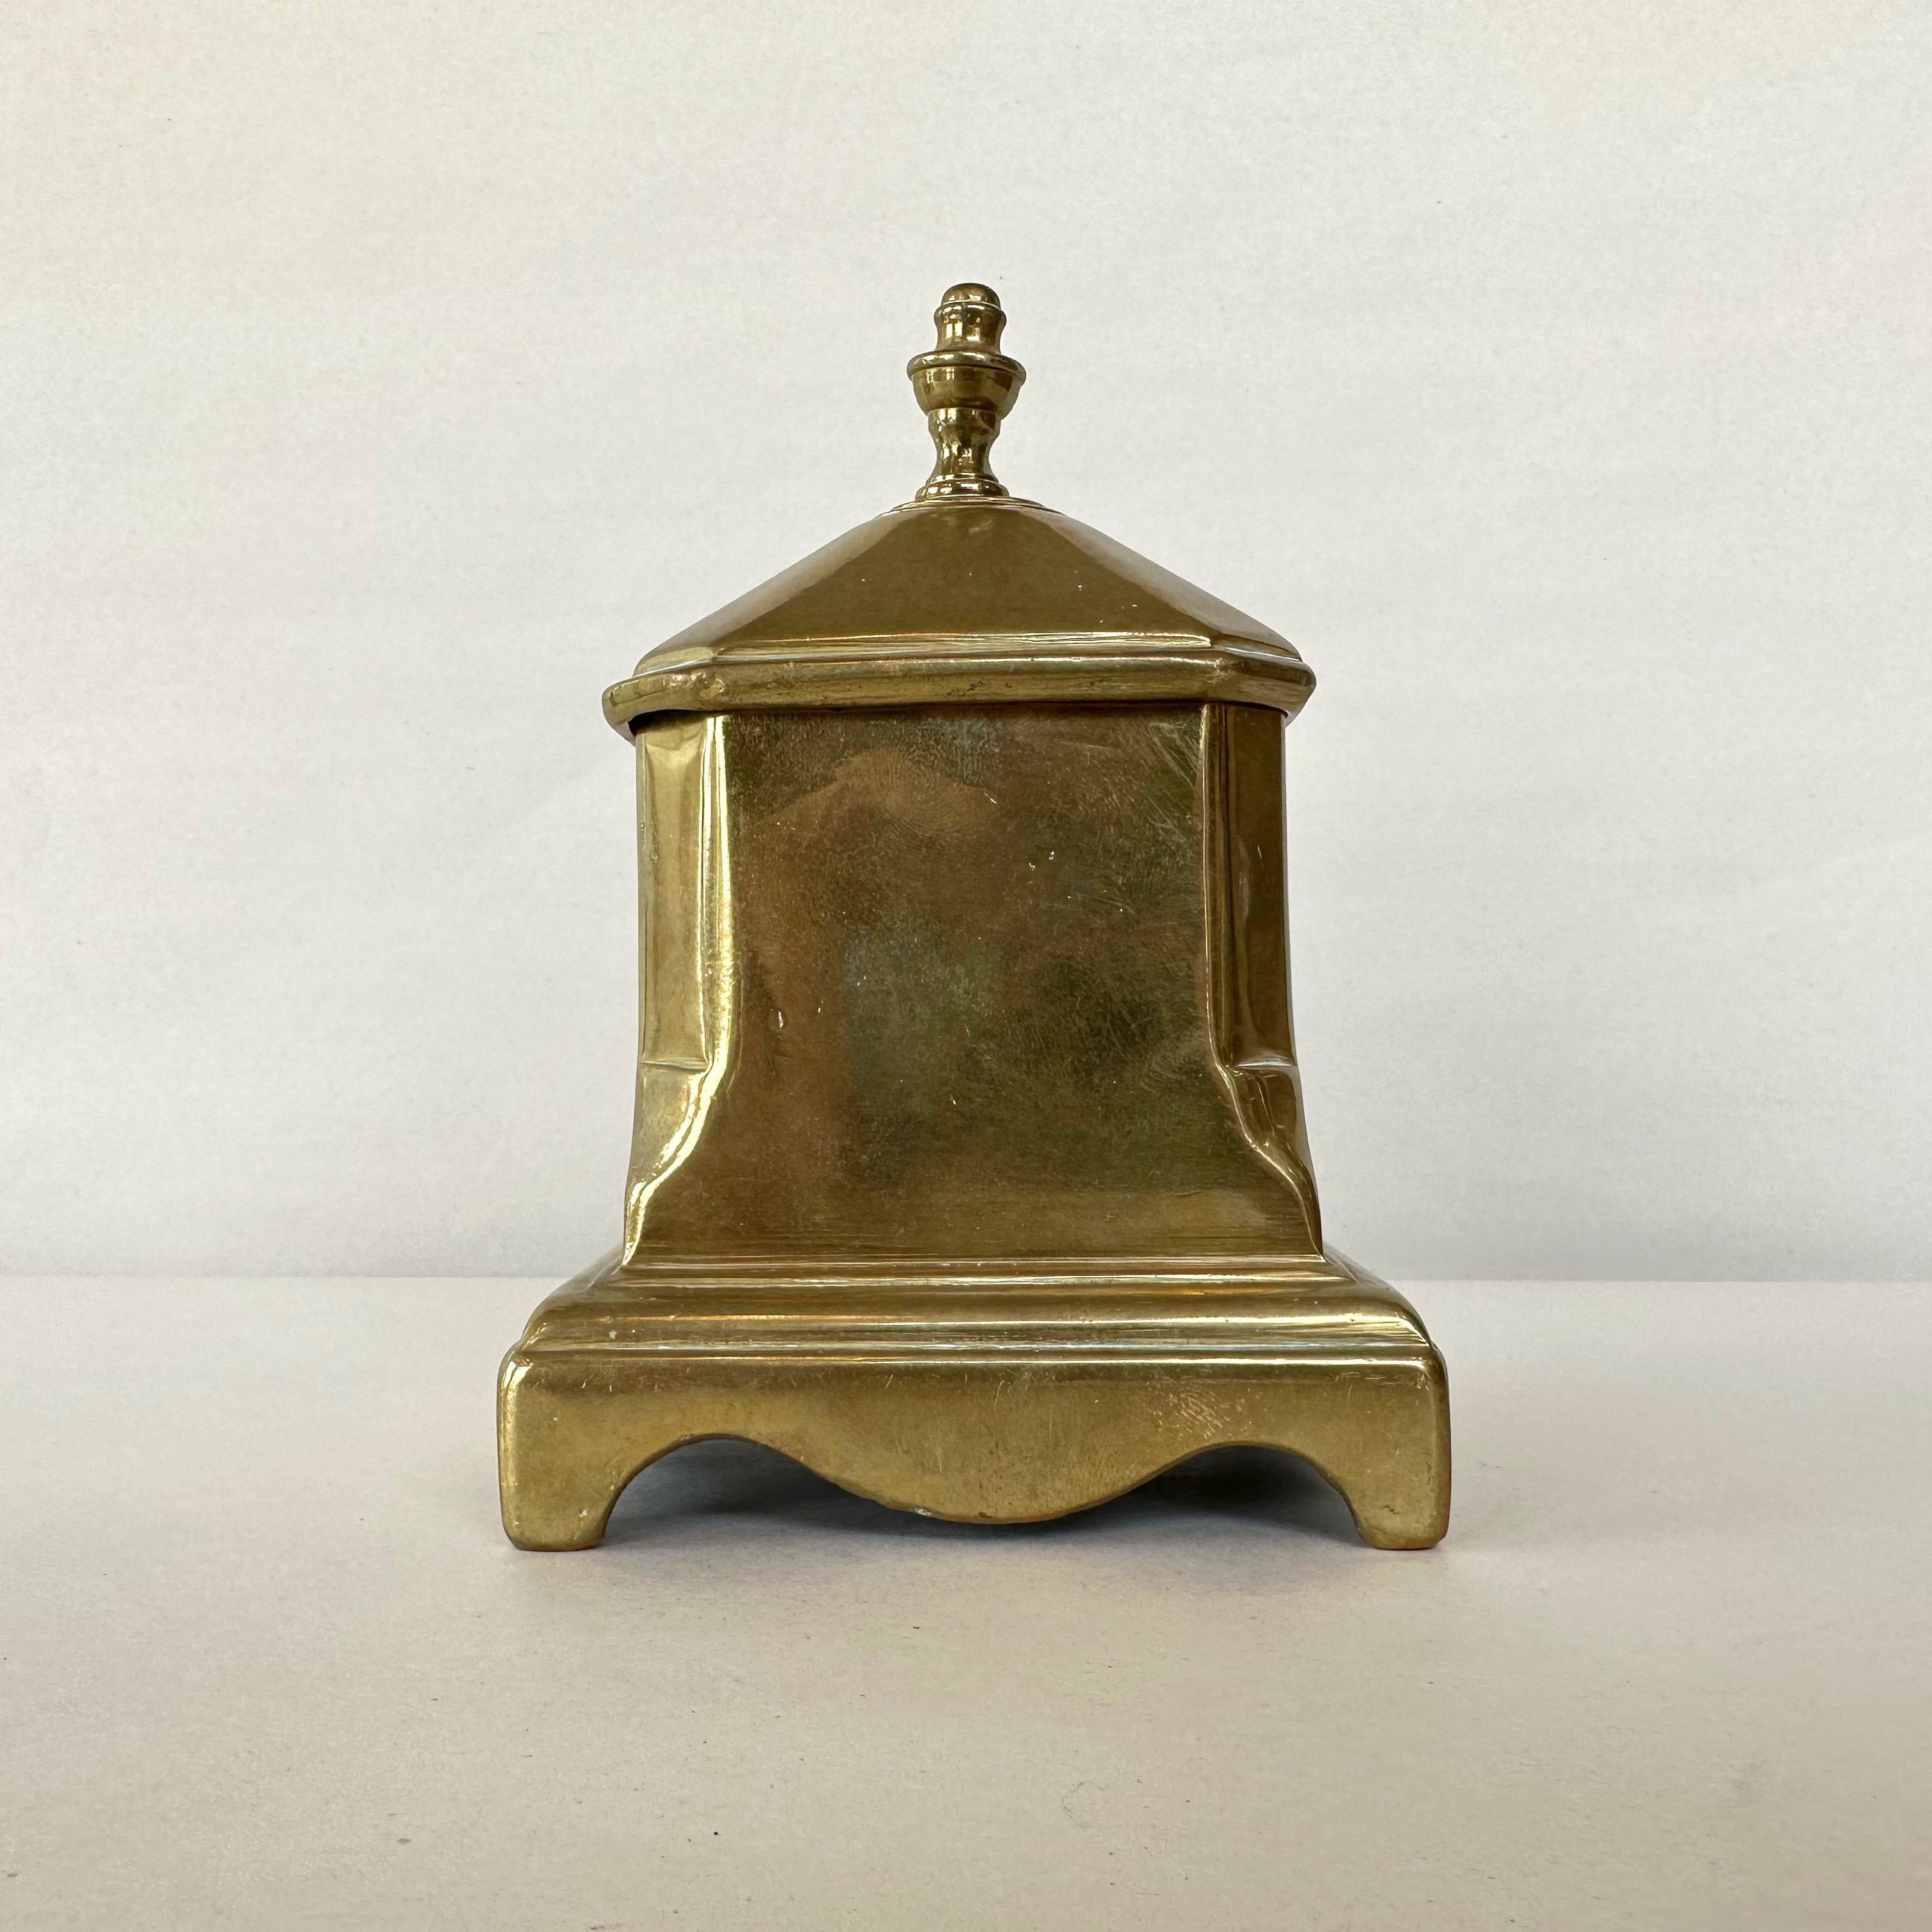 A circa 1750 American Queen Anne period cast brass tobacco or snuff box with lid.

Charming and rare antique box from the New England American colonies features beveled and shaped corners, scalloped aprons, and a peaked lid with finial. Lead-lined